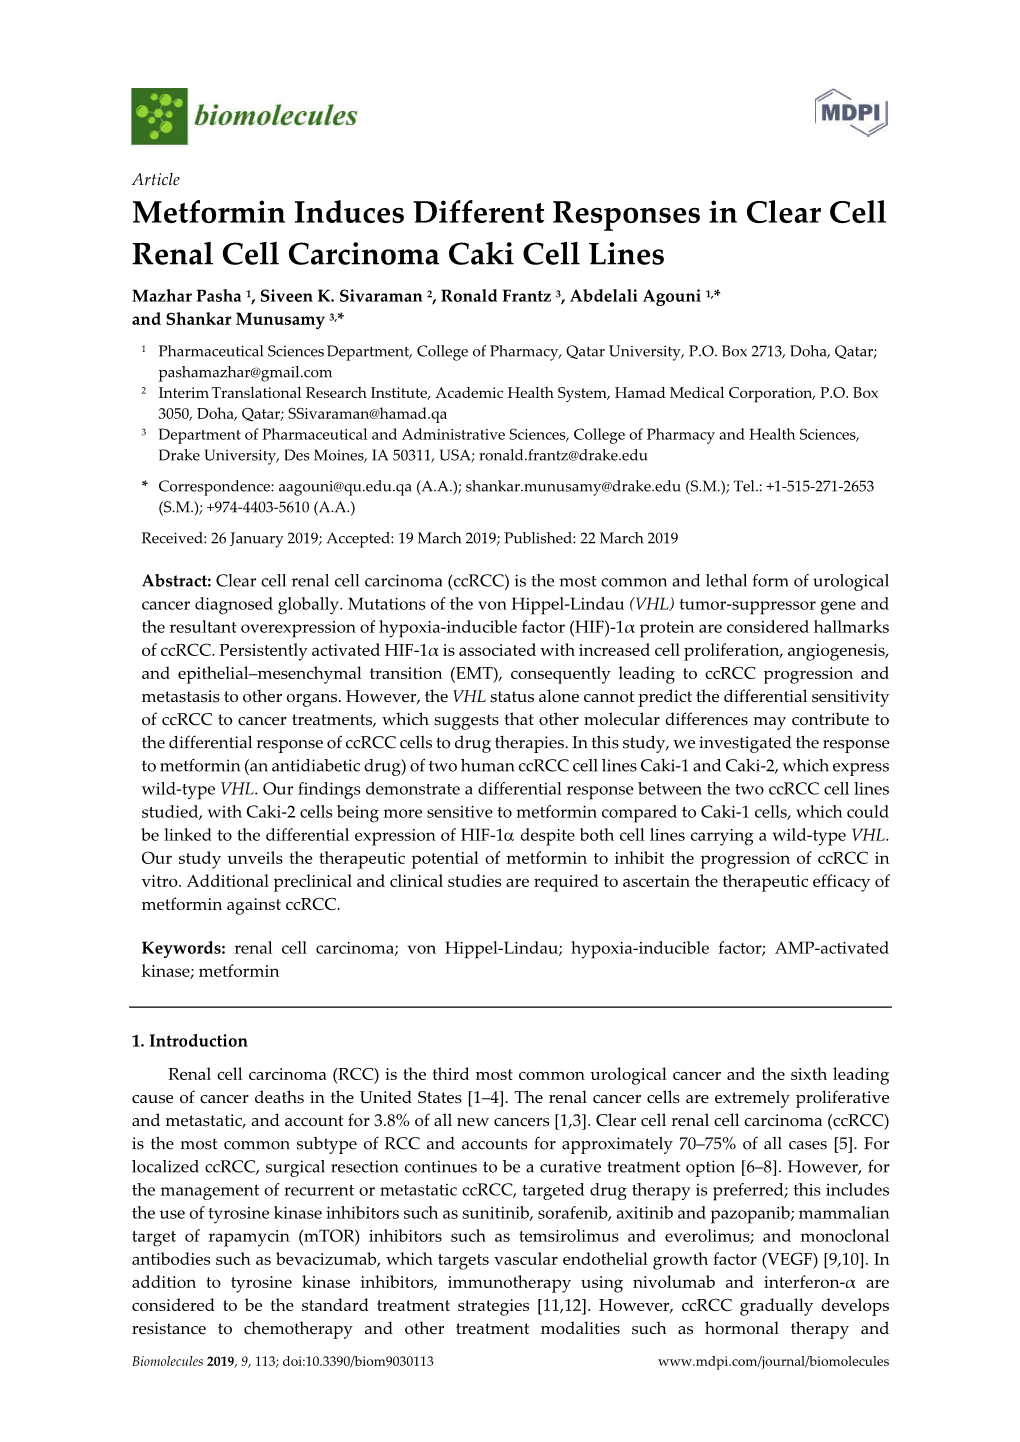 Metformin Induces Different Responses in Clear Cell Renal Cell Carcinoma Caki Cell Lines